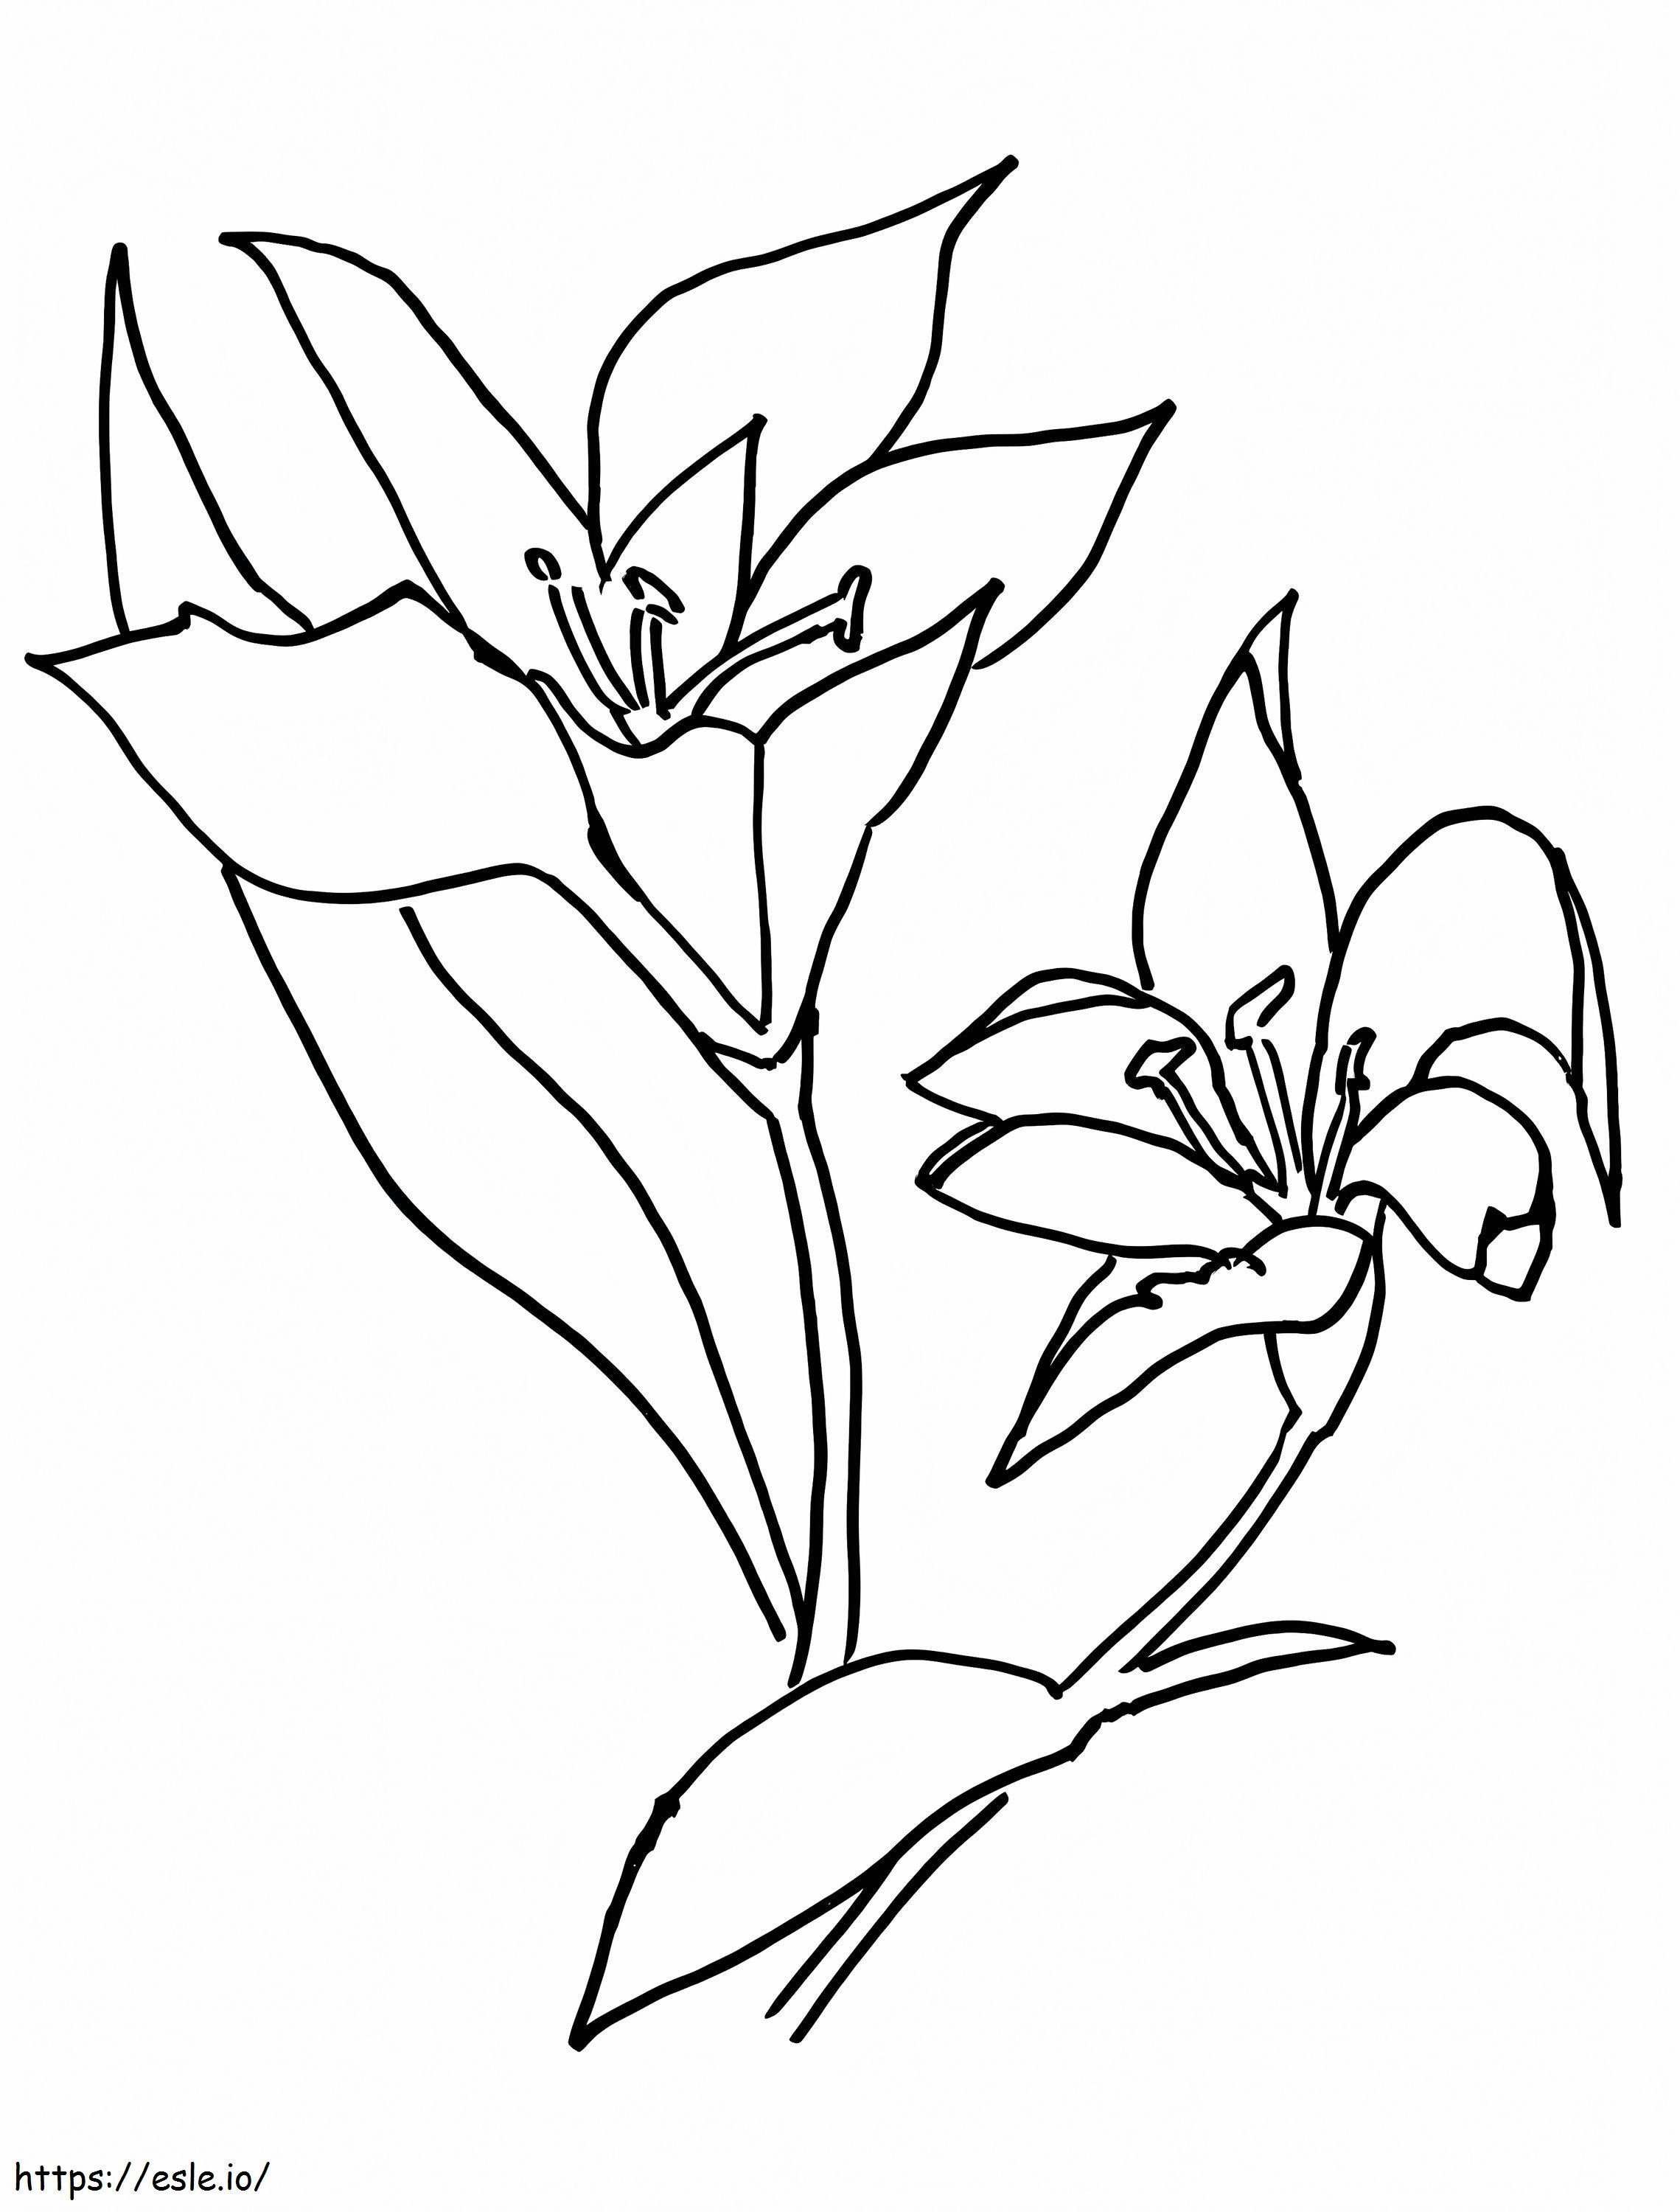 Two Lily Flowers coloring page